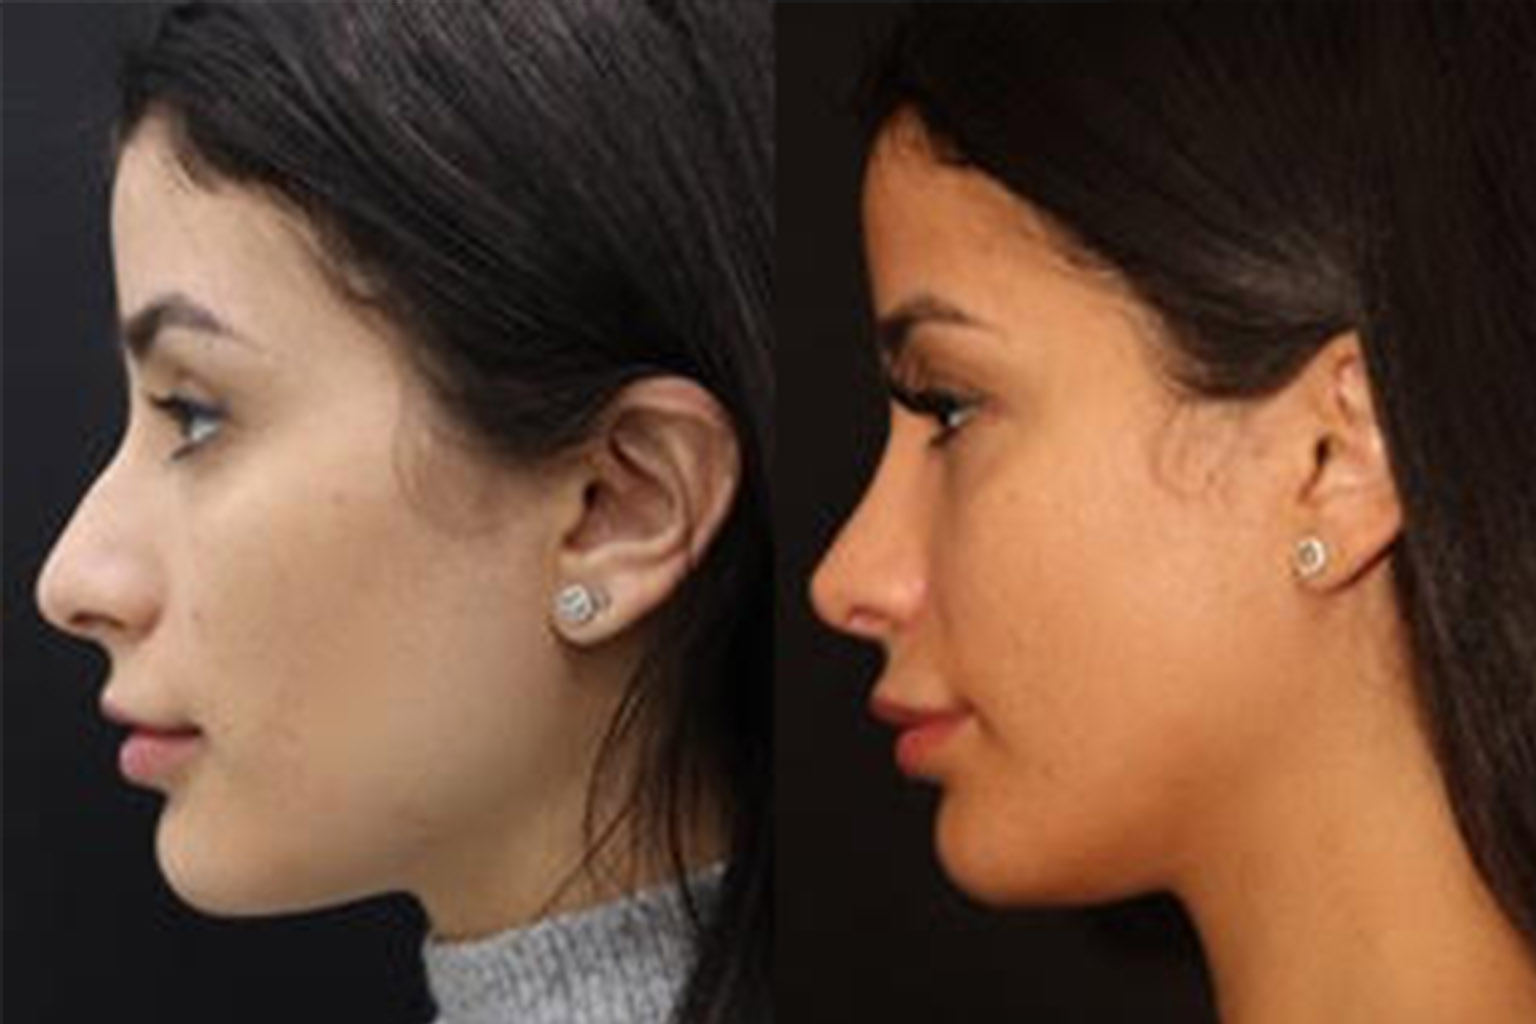 Rhinoplasty Toronto before and after